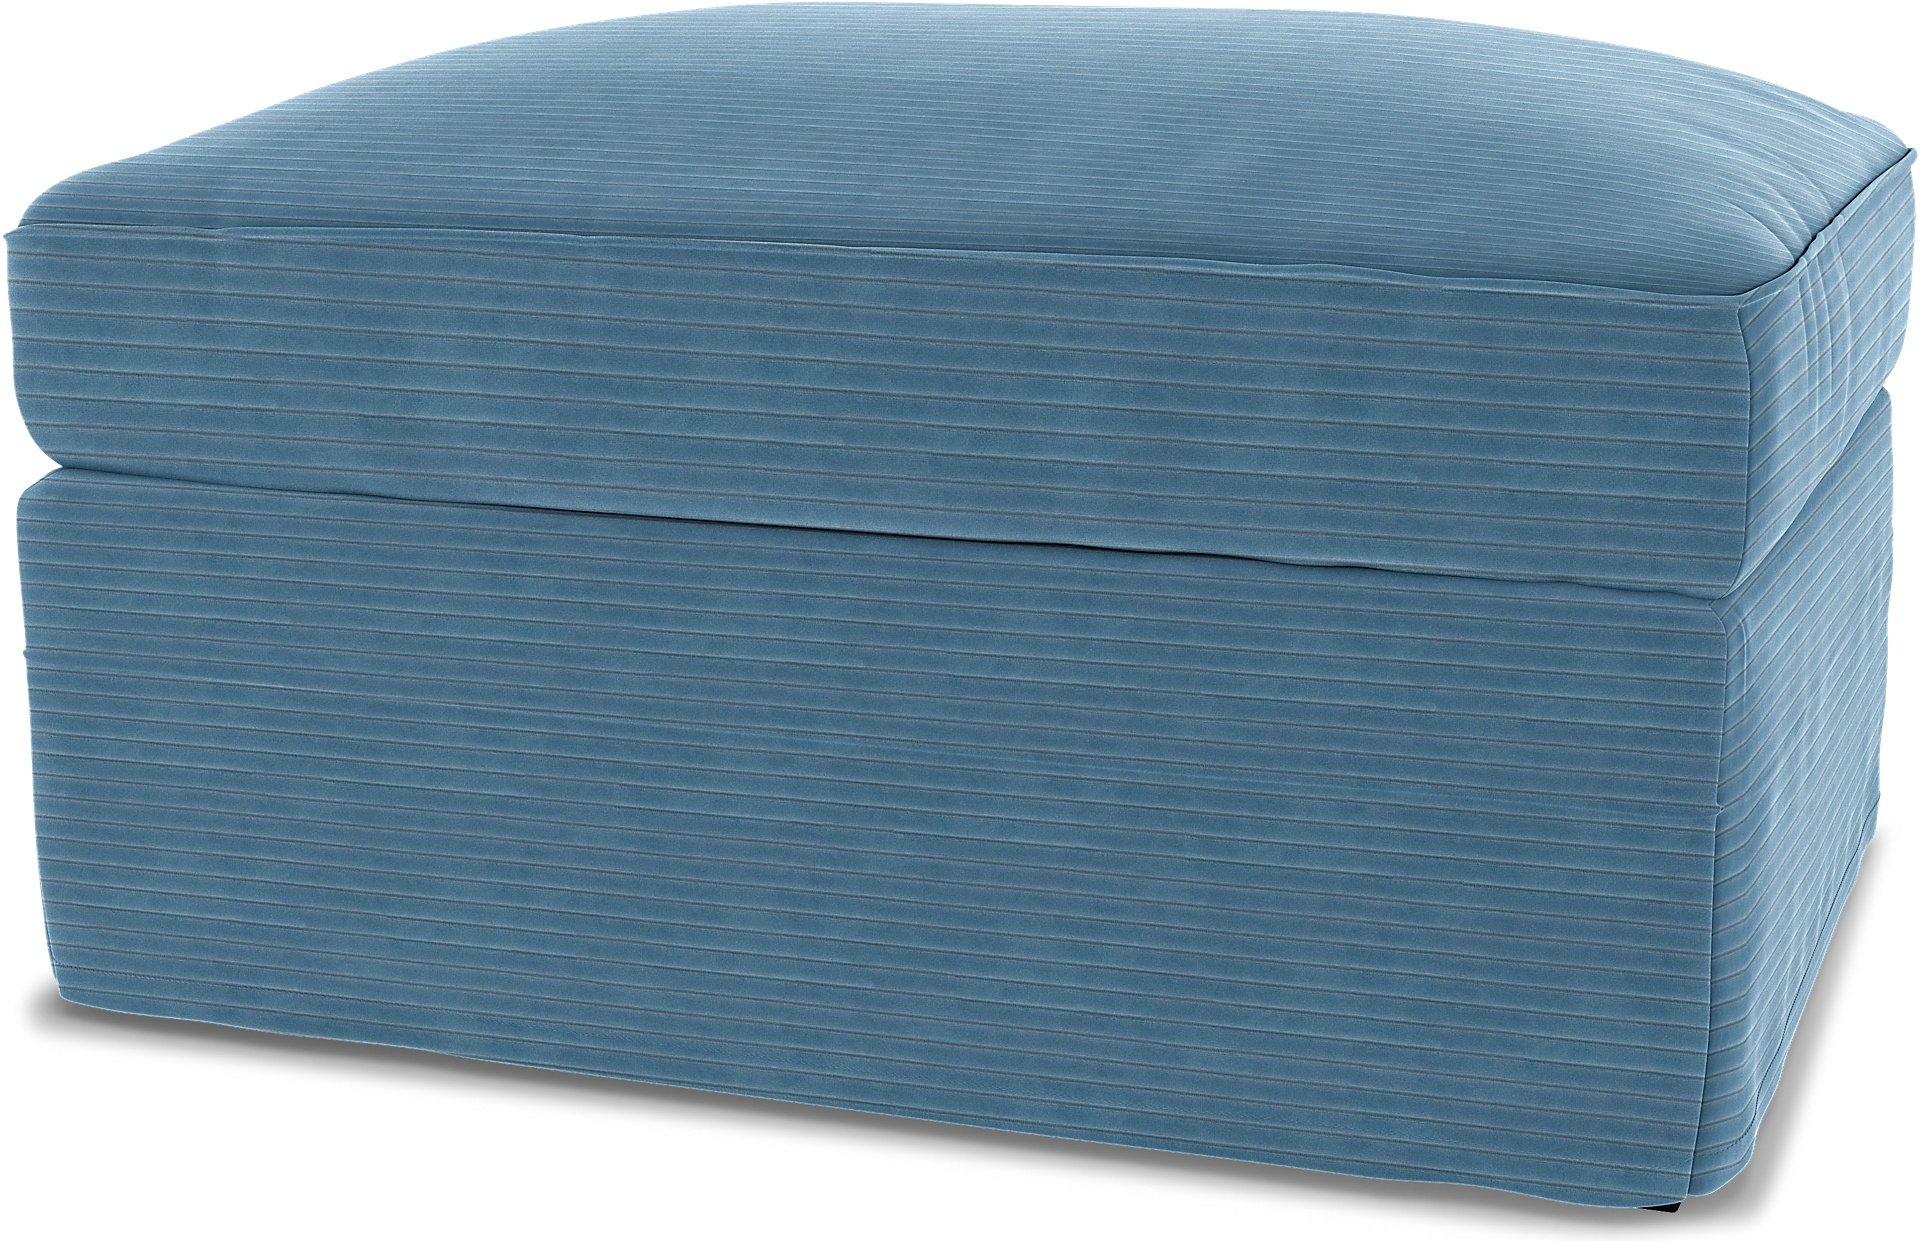 IKEA - Gronlid Footstool with Storage Cover, Sky Blue, Corduroy - Bemz